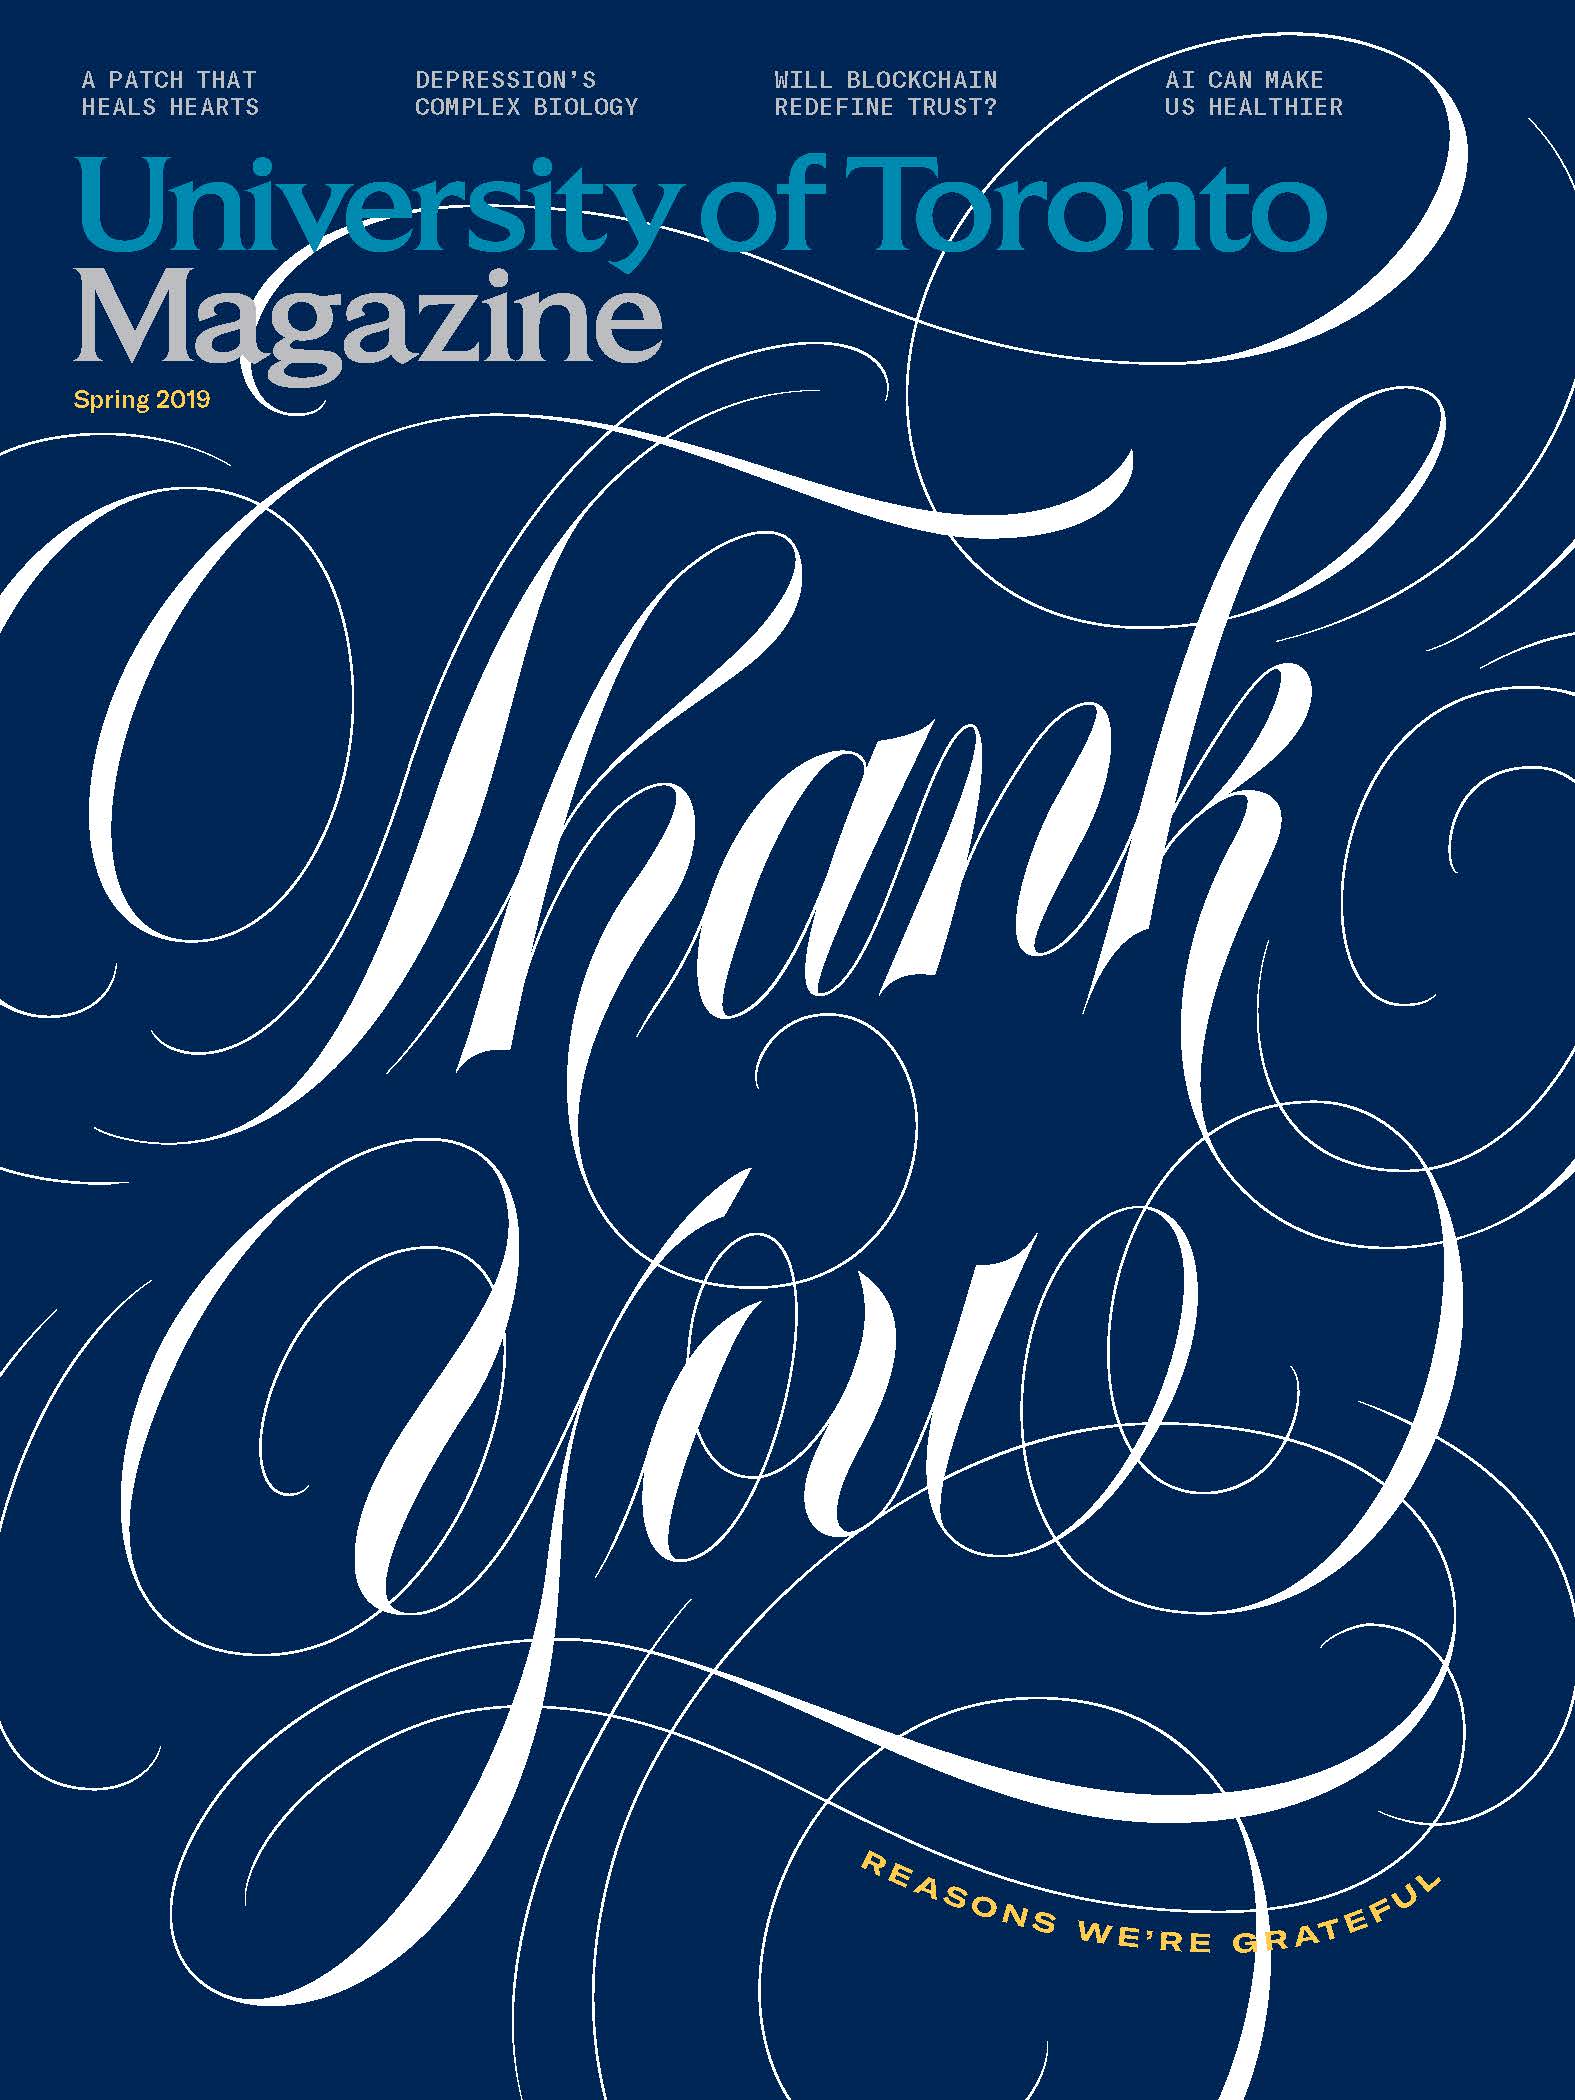 The cover of the Spring 2019 issue of University of Toronto Magazine, featuring a large thank you in elegant script